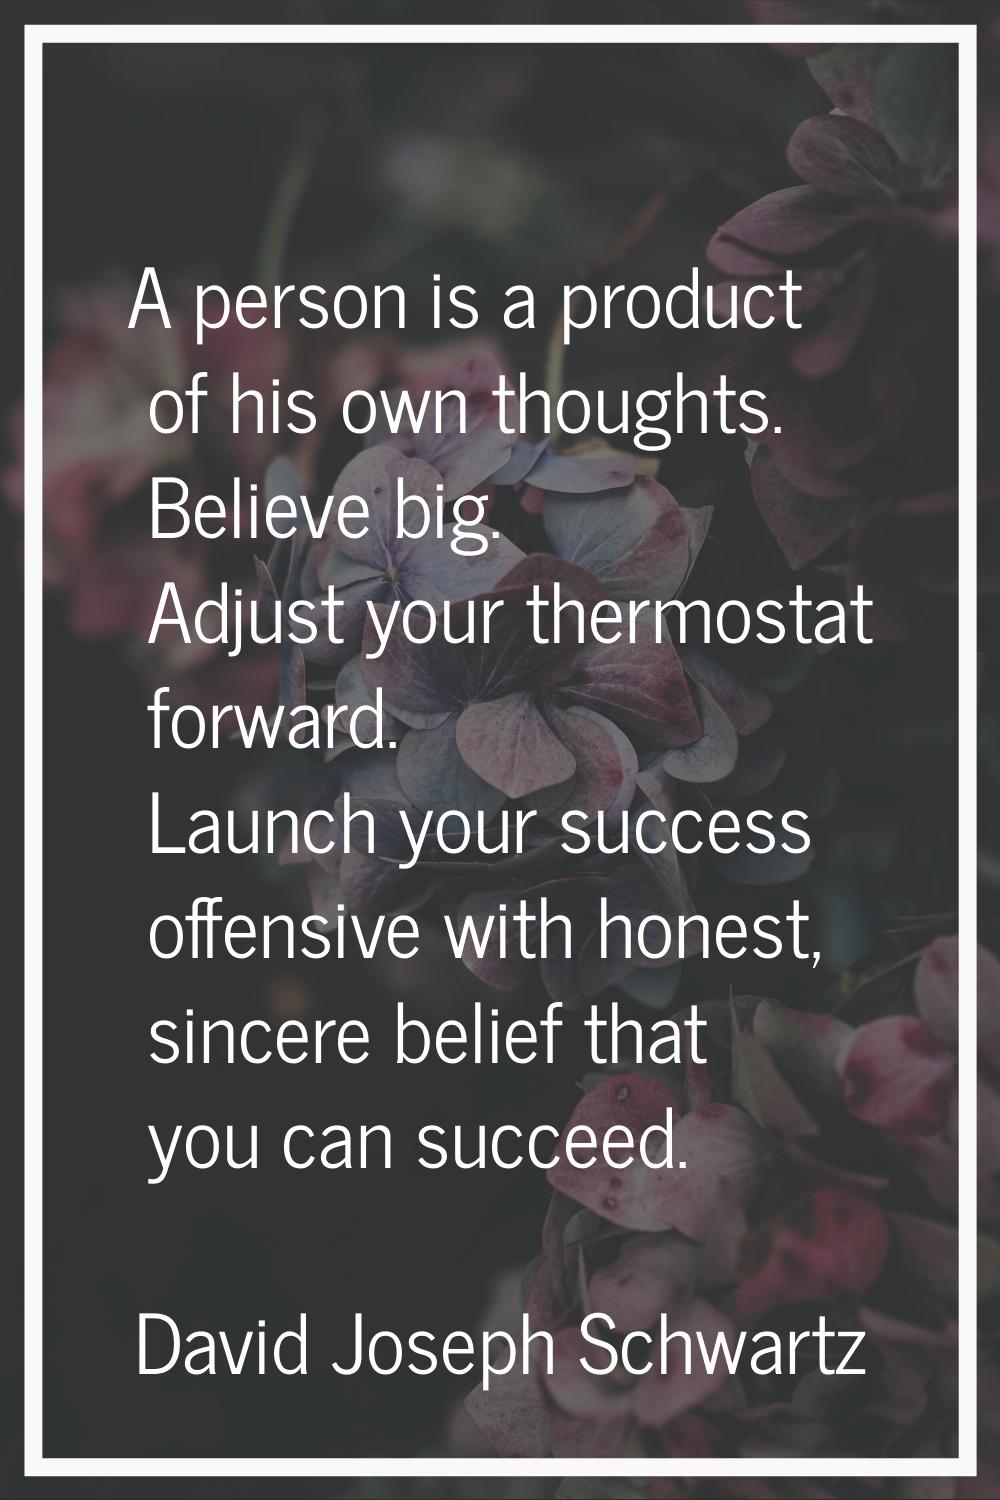 A person is a product of his own thoughts. Believe big. Adjust your thermostat forward. Launch your